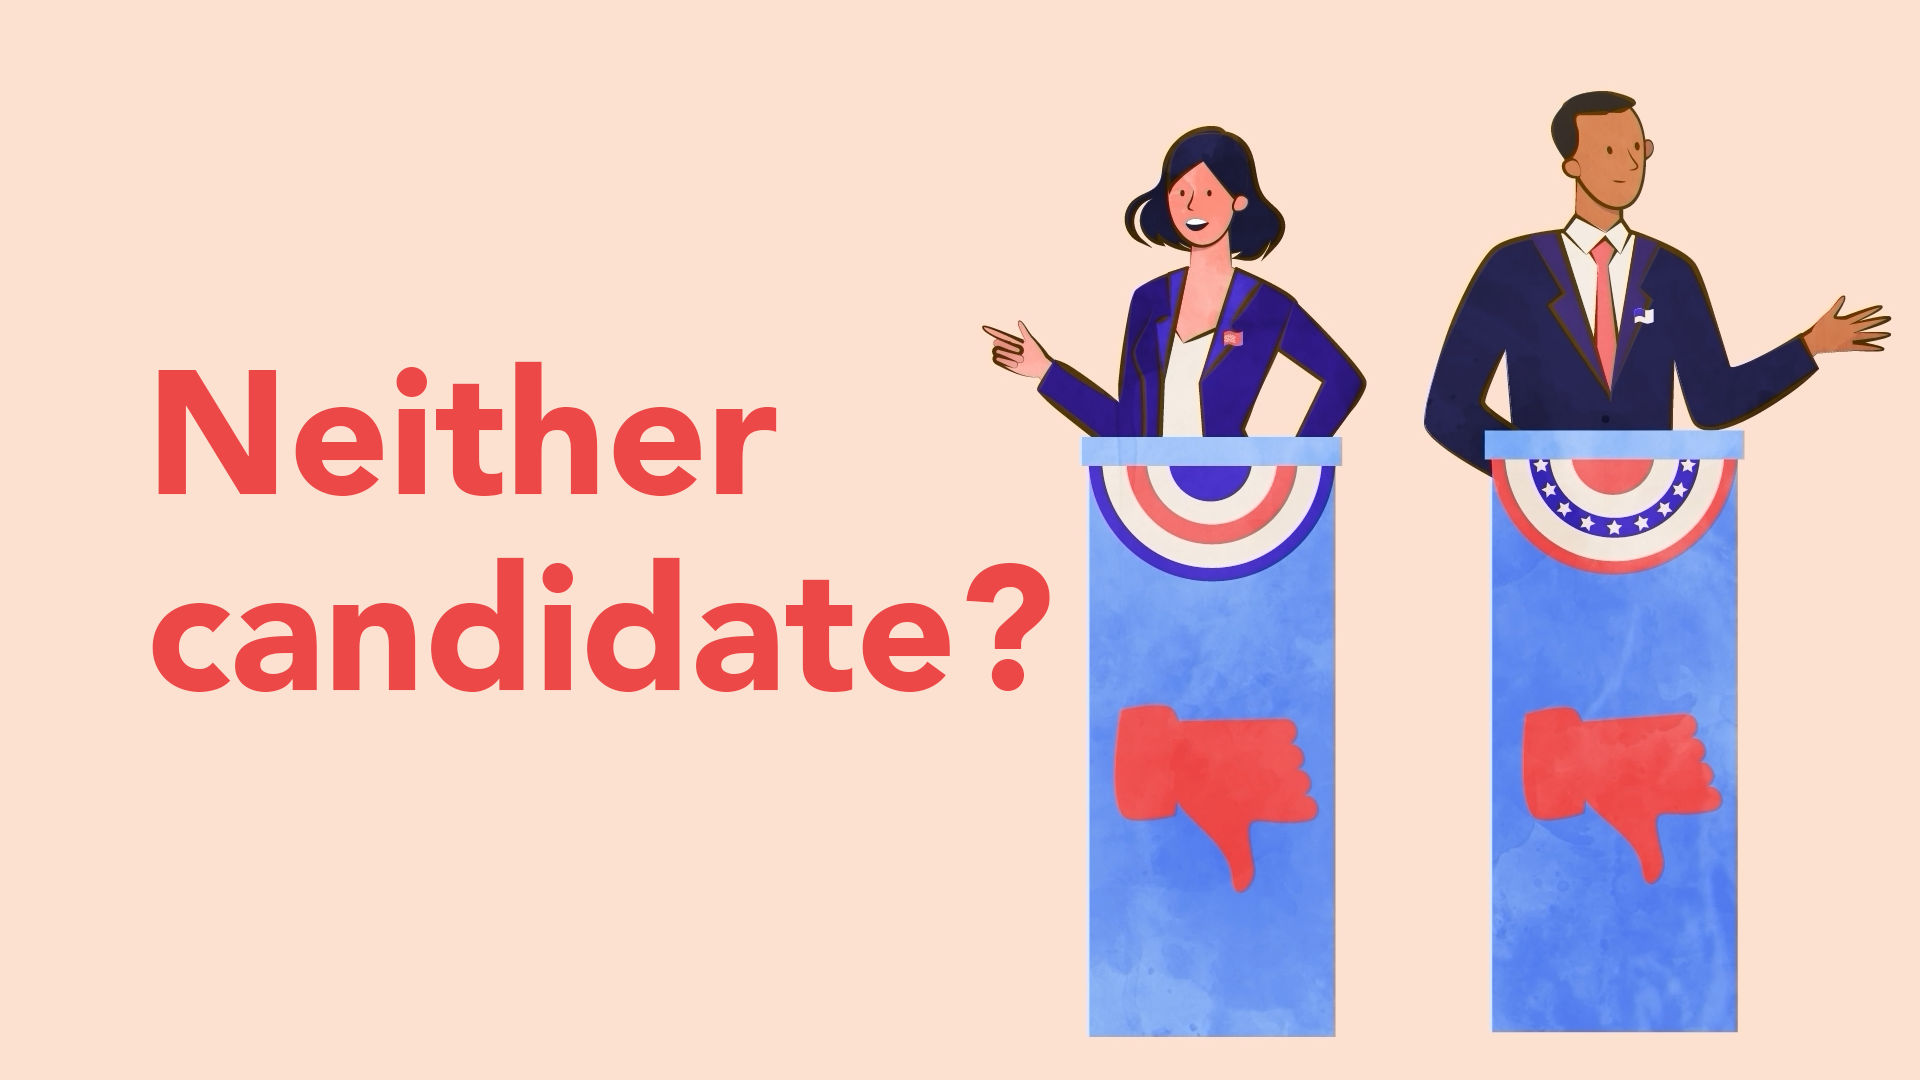 How do I vote when I don't like either candidate?